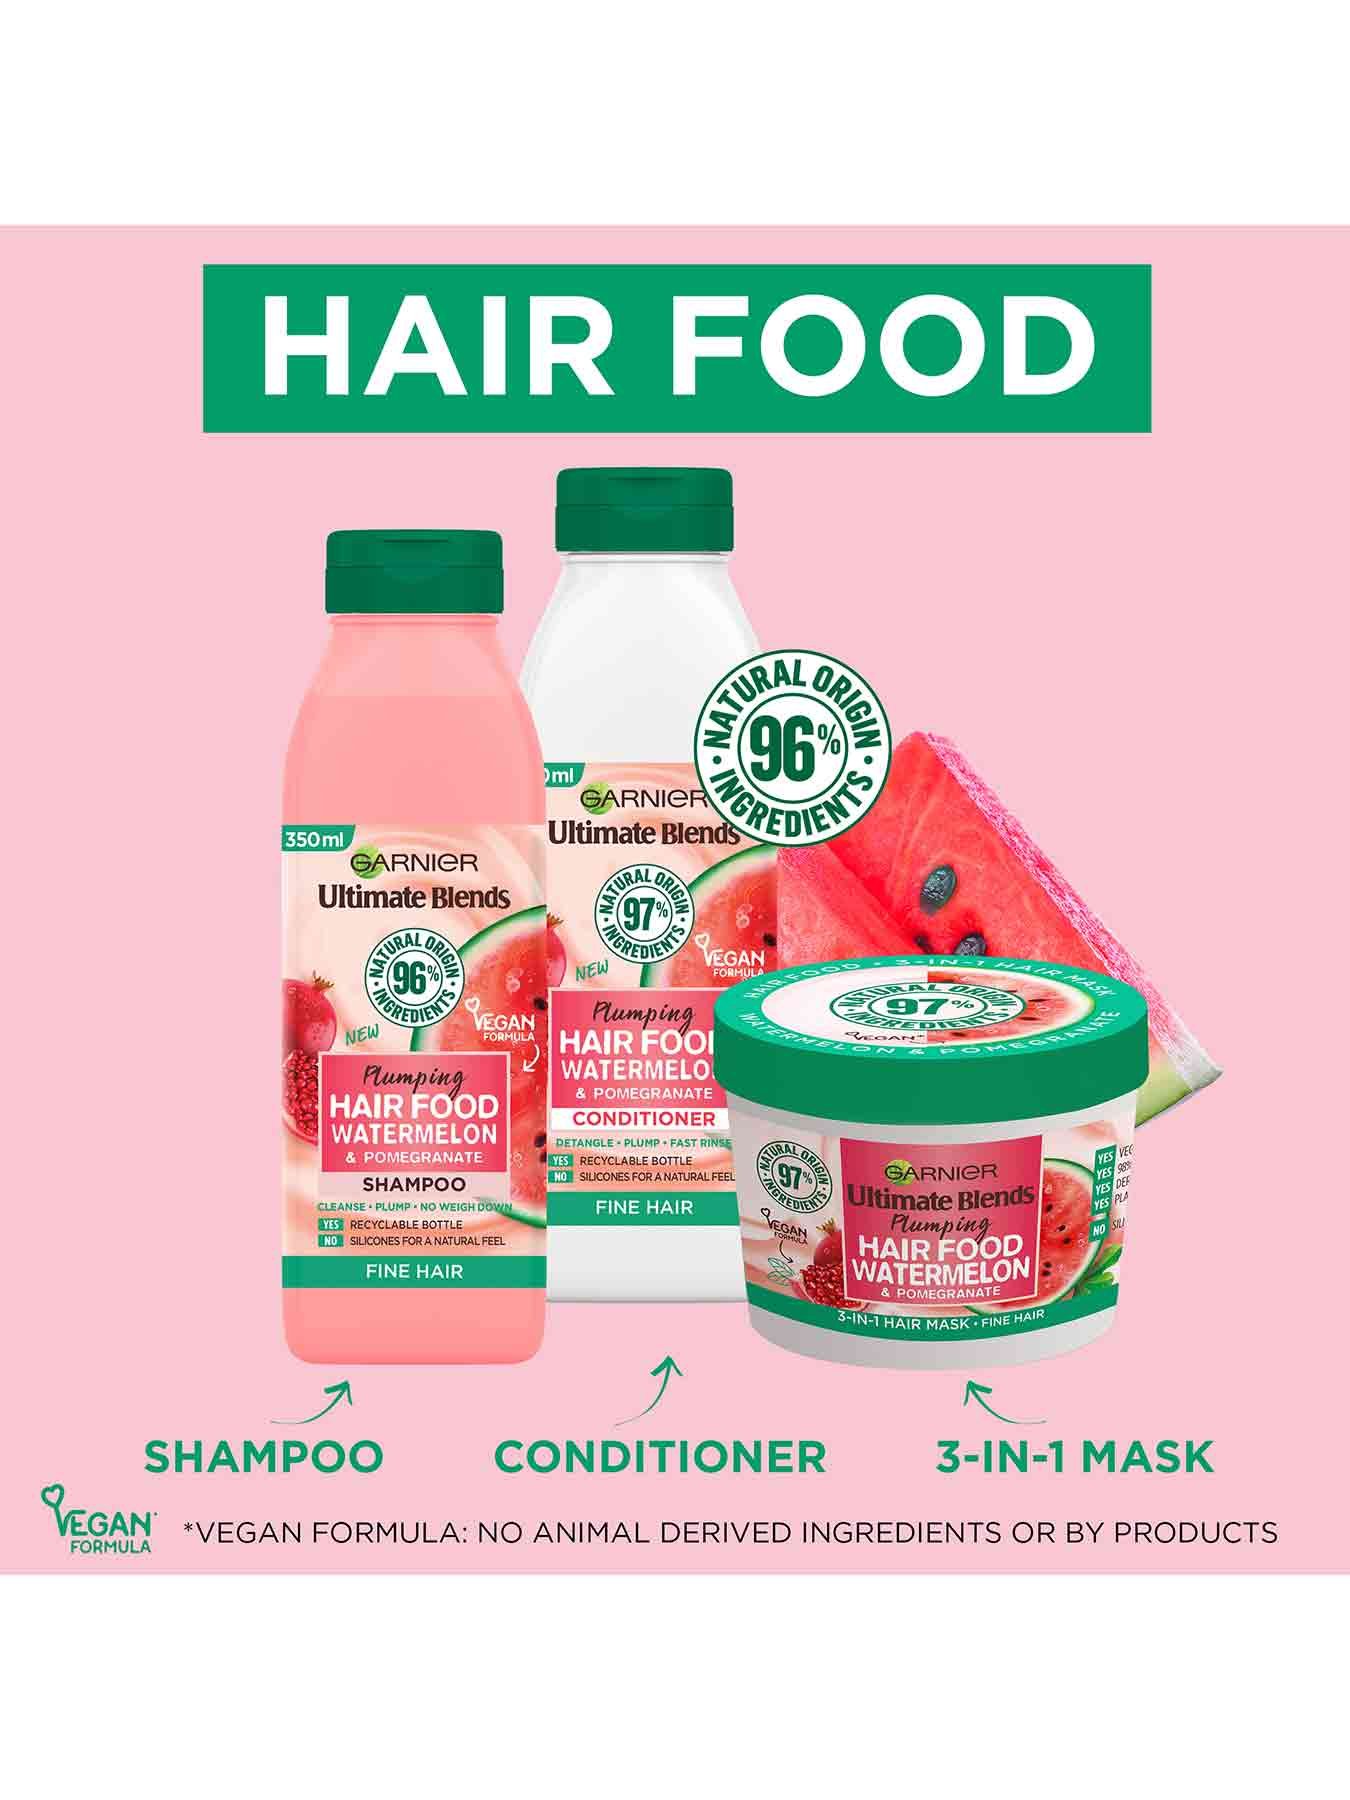 Hair Food watermelon range of mask, shampoo and conditioner